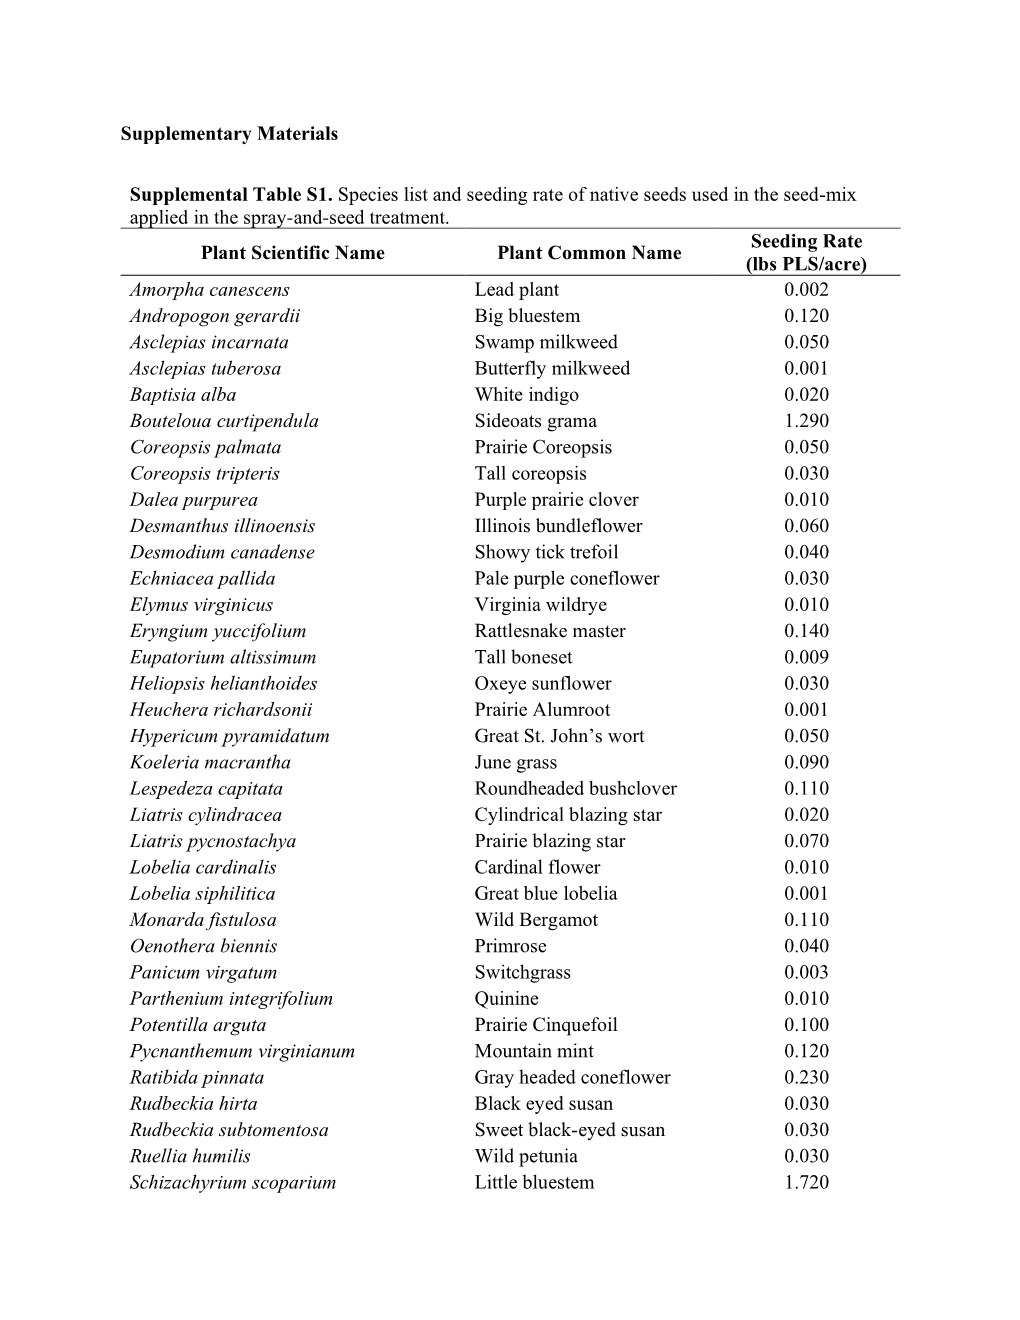 Supplementary Materials Supplemental Table S1. Species List and Seeding Rate of Native Seeds Used in the Seed-Mix Applied In